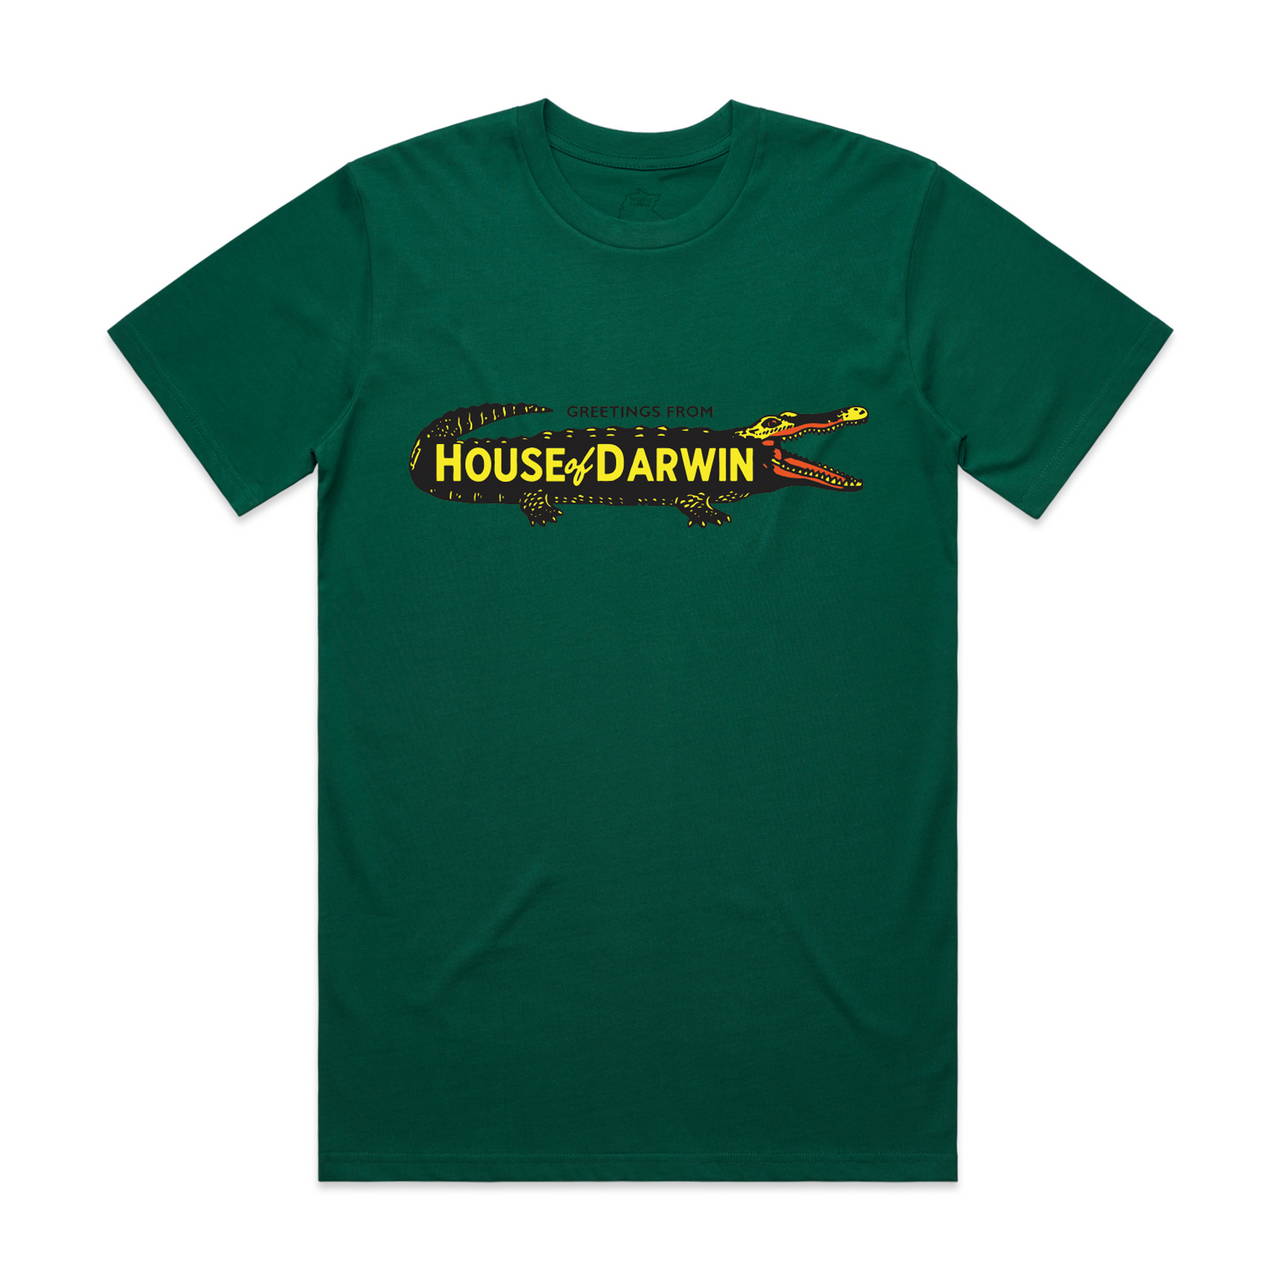 Greetings From House of Darwin